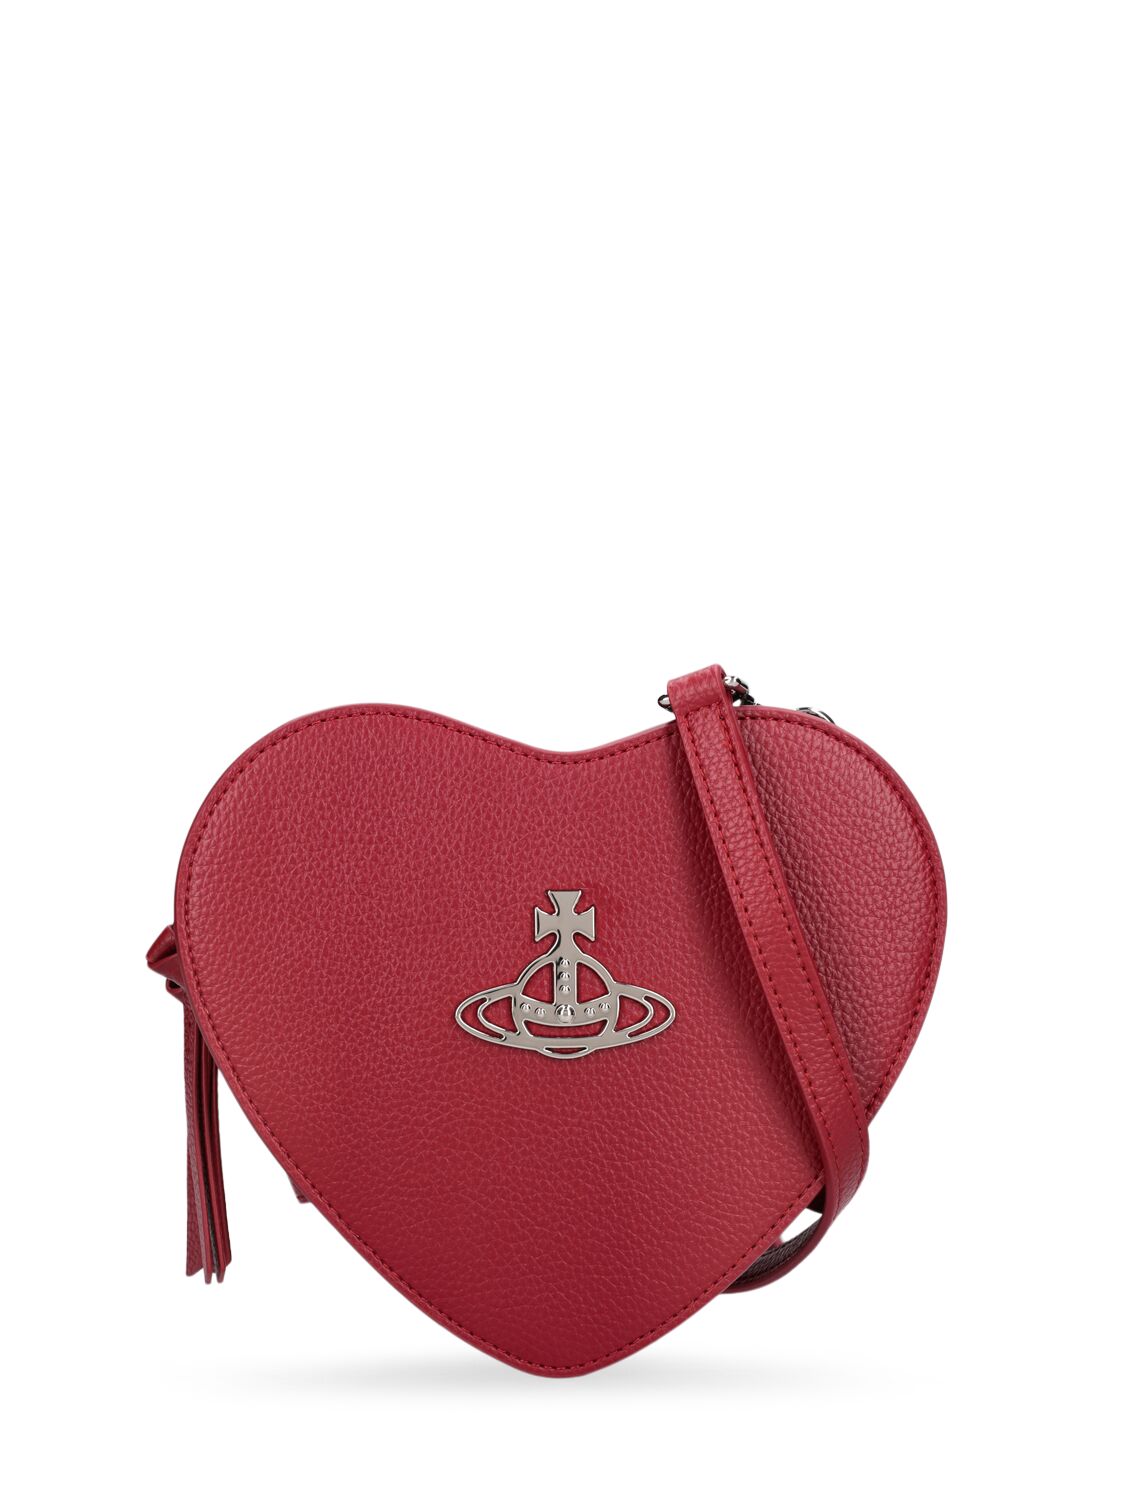 Image of Louise Heart Faux Leather Crossbody Bag